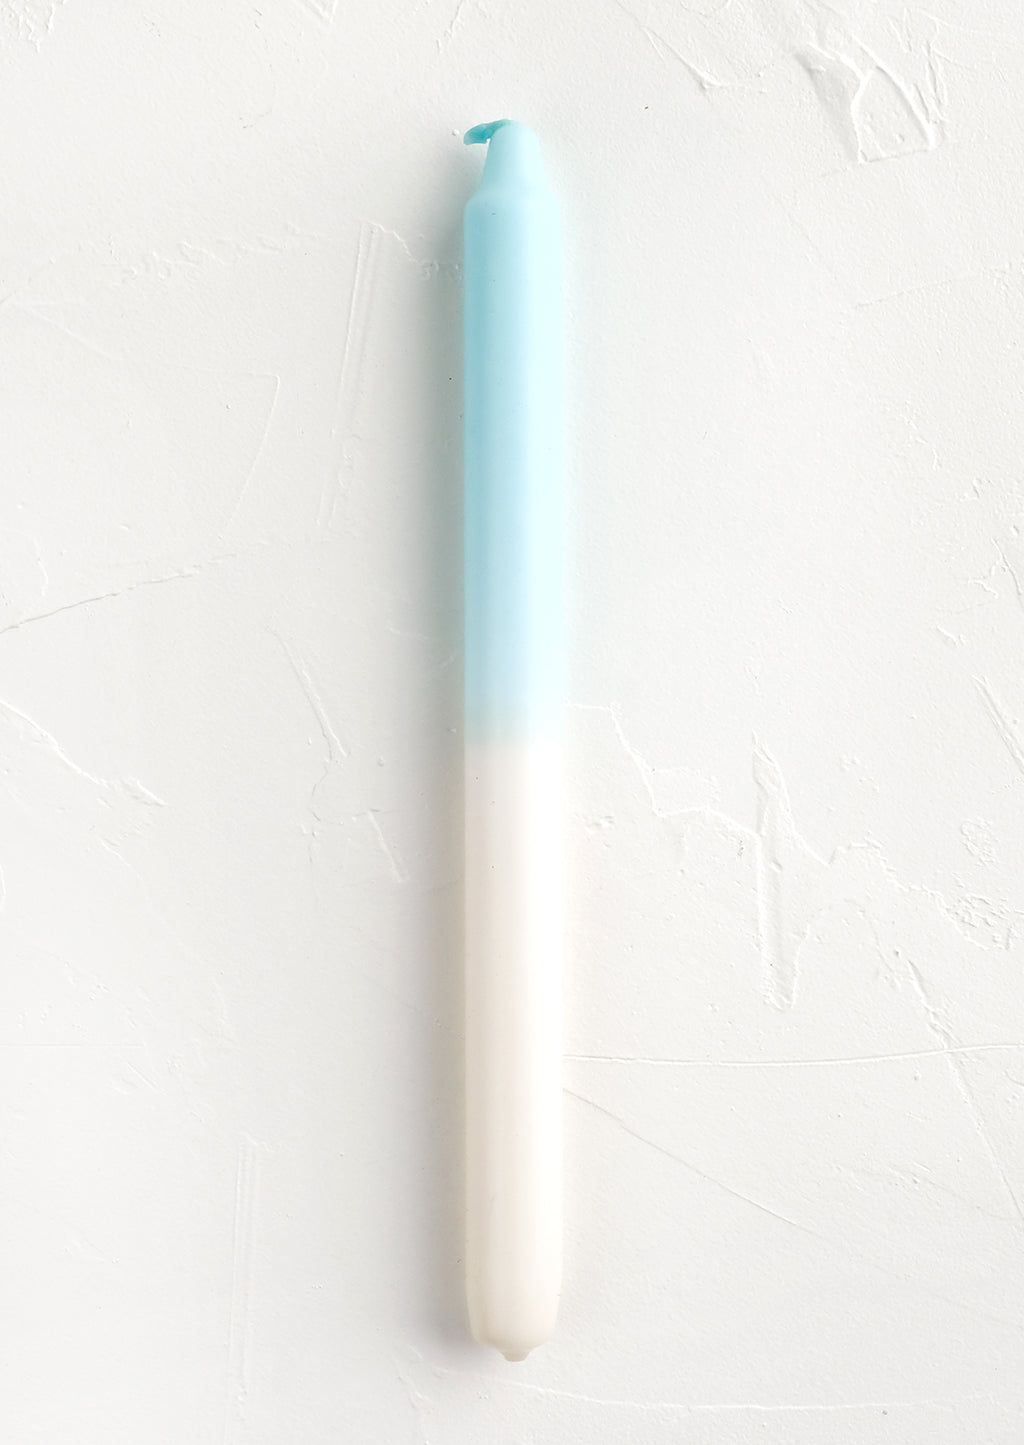 Ivory / Sky Blue: A straight taper candle in blue and white.